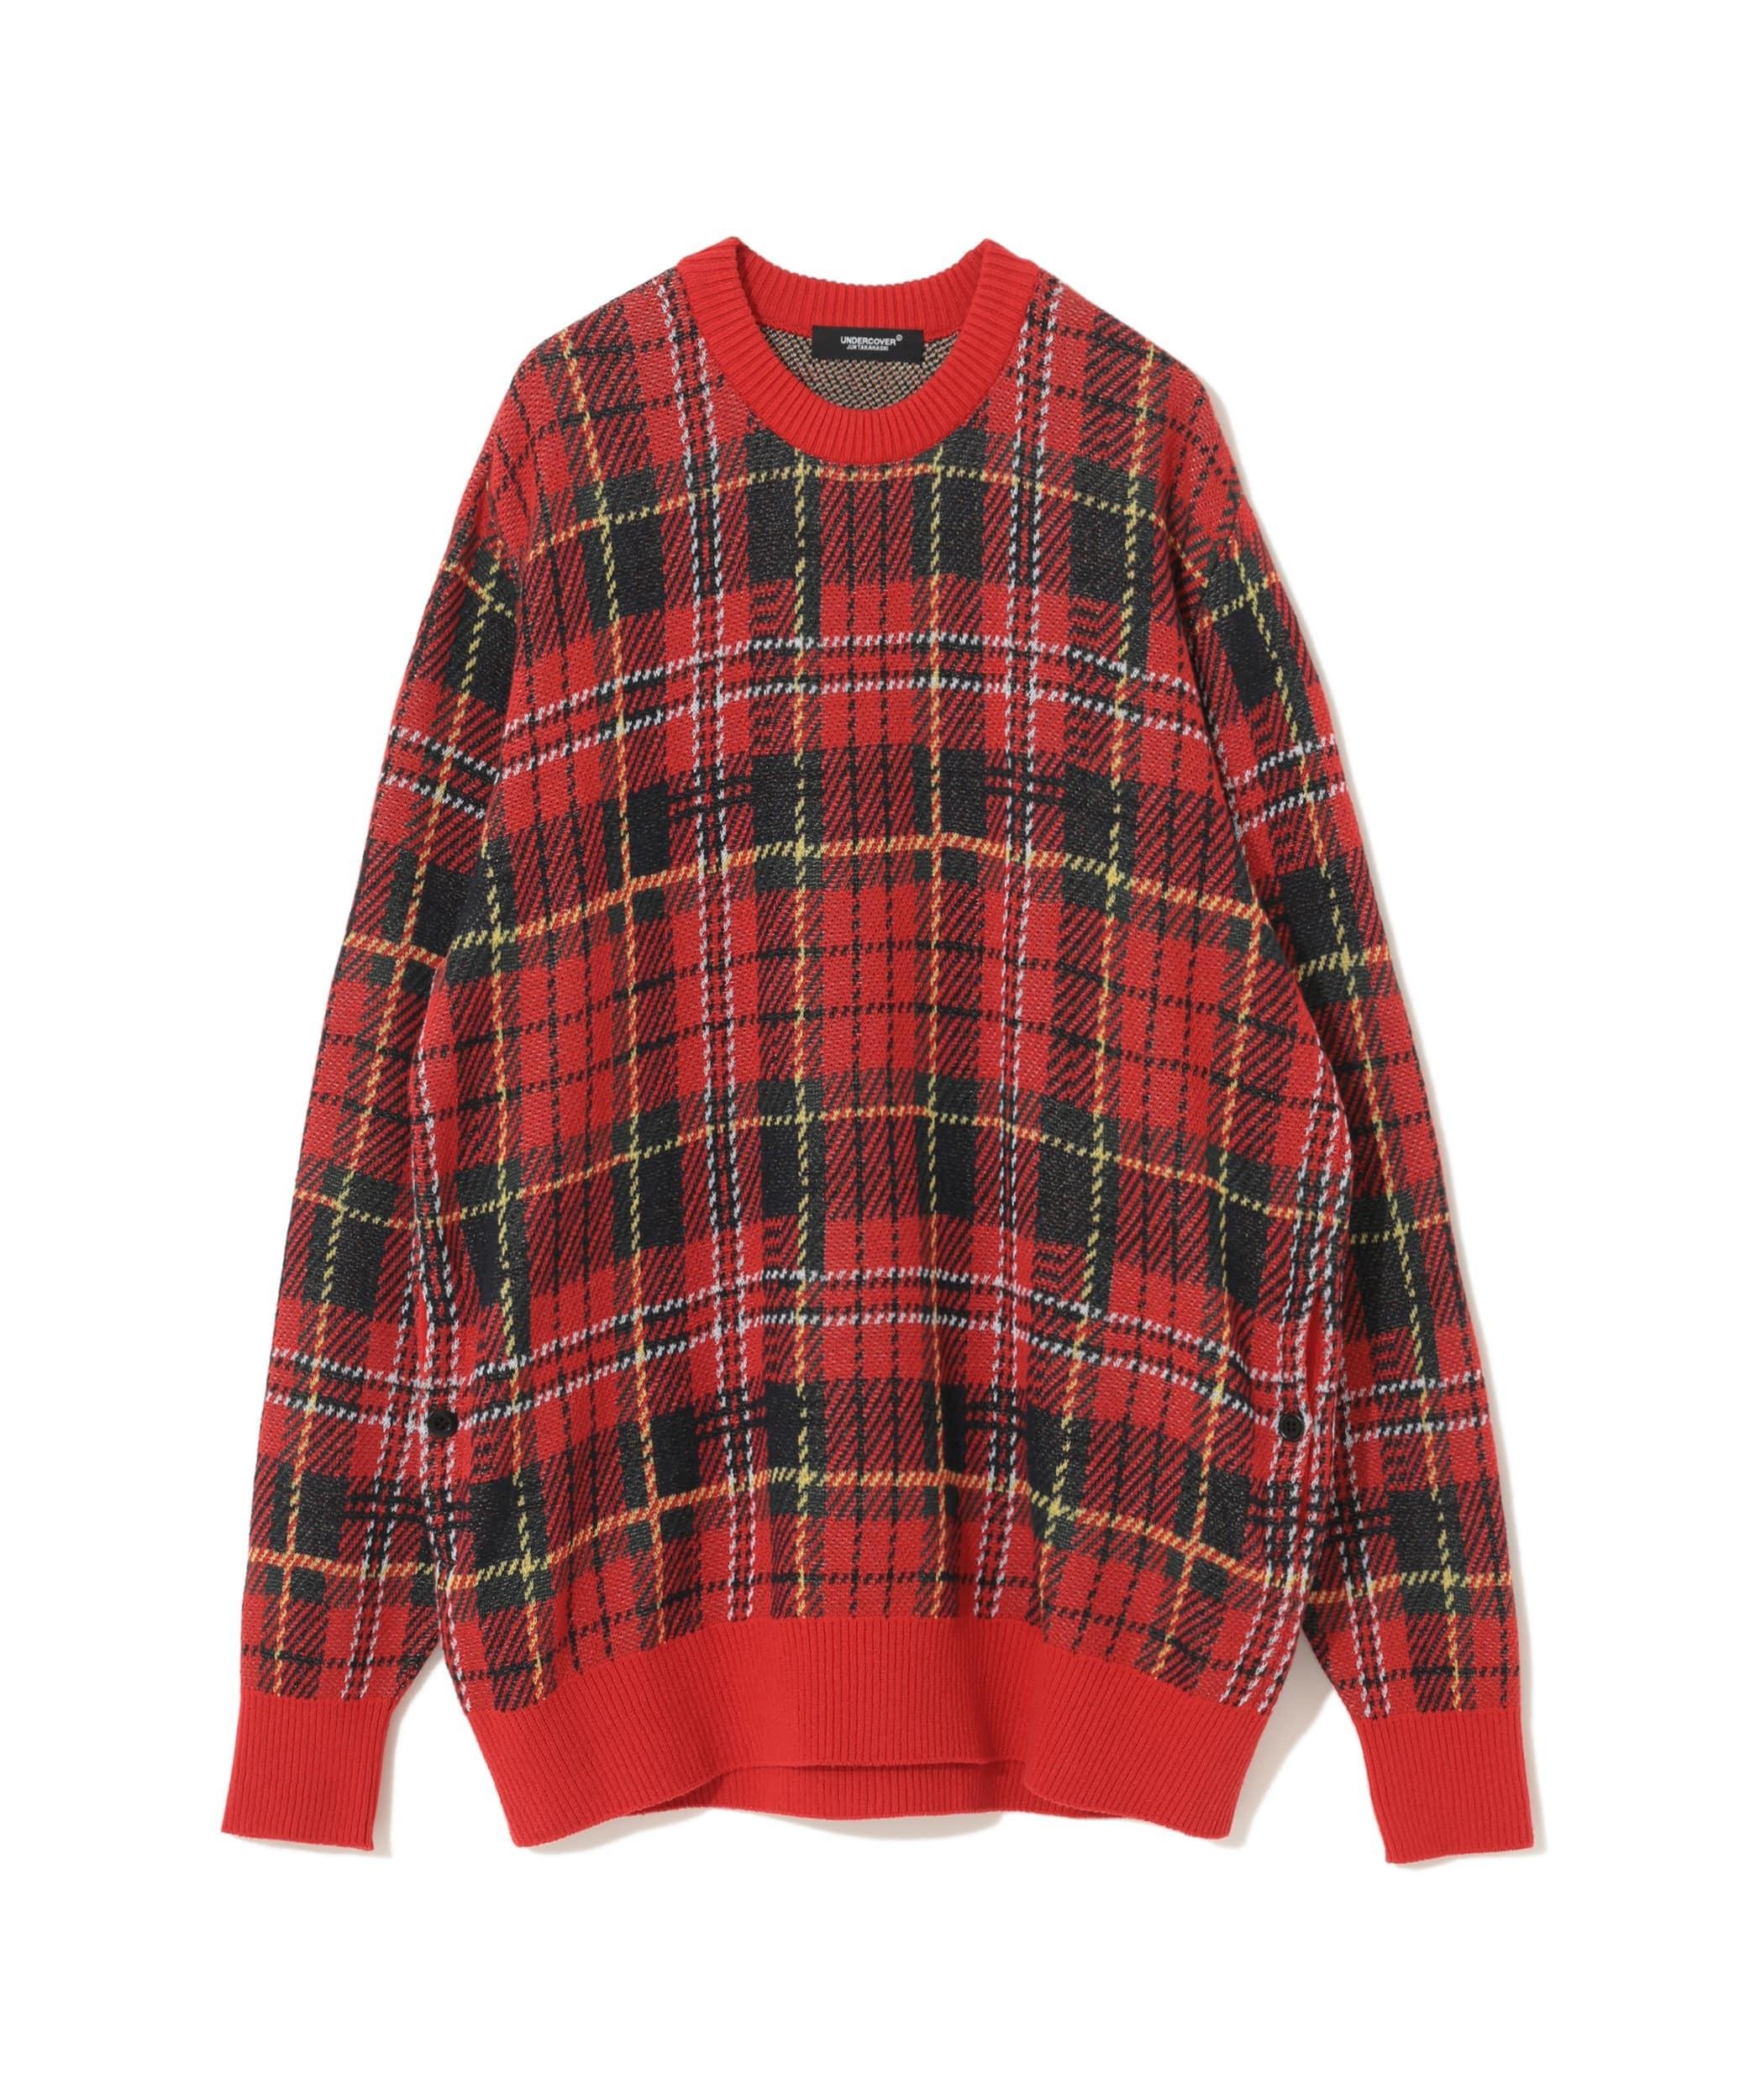 UNDERCOVER - Men's Tartan Knit - (Red) by UNDERCOVER